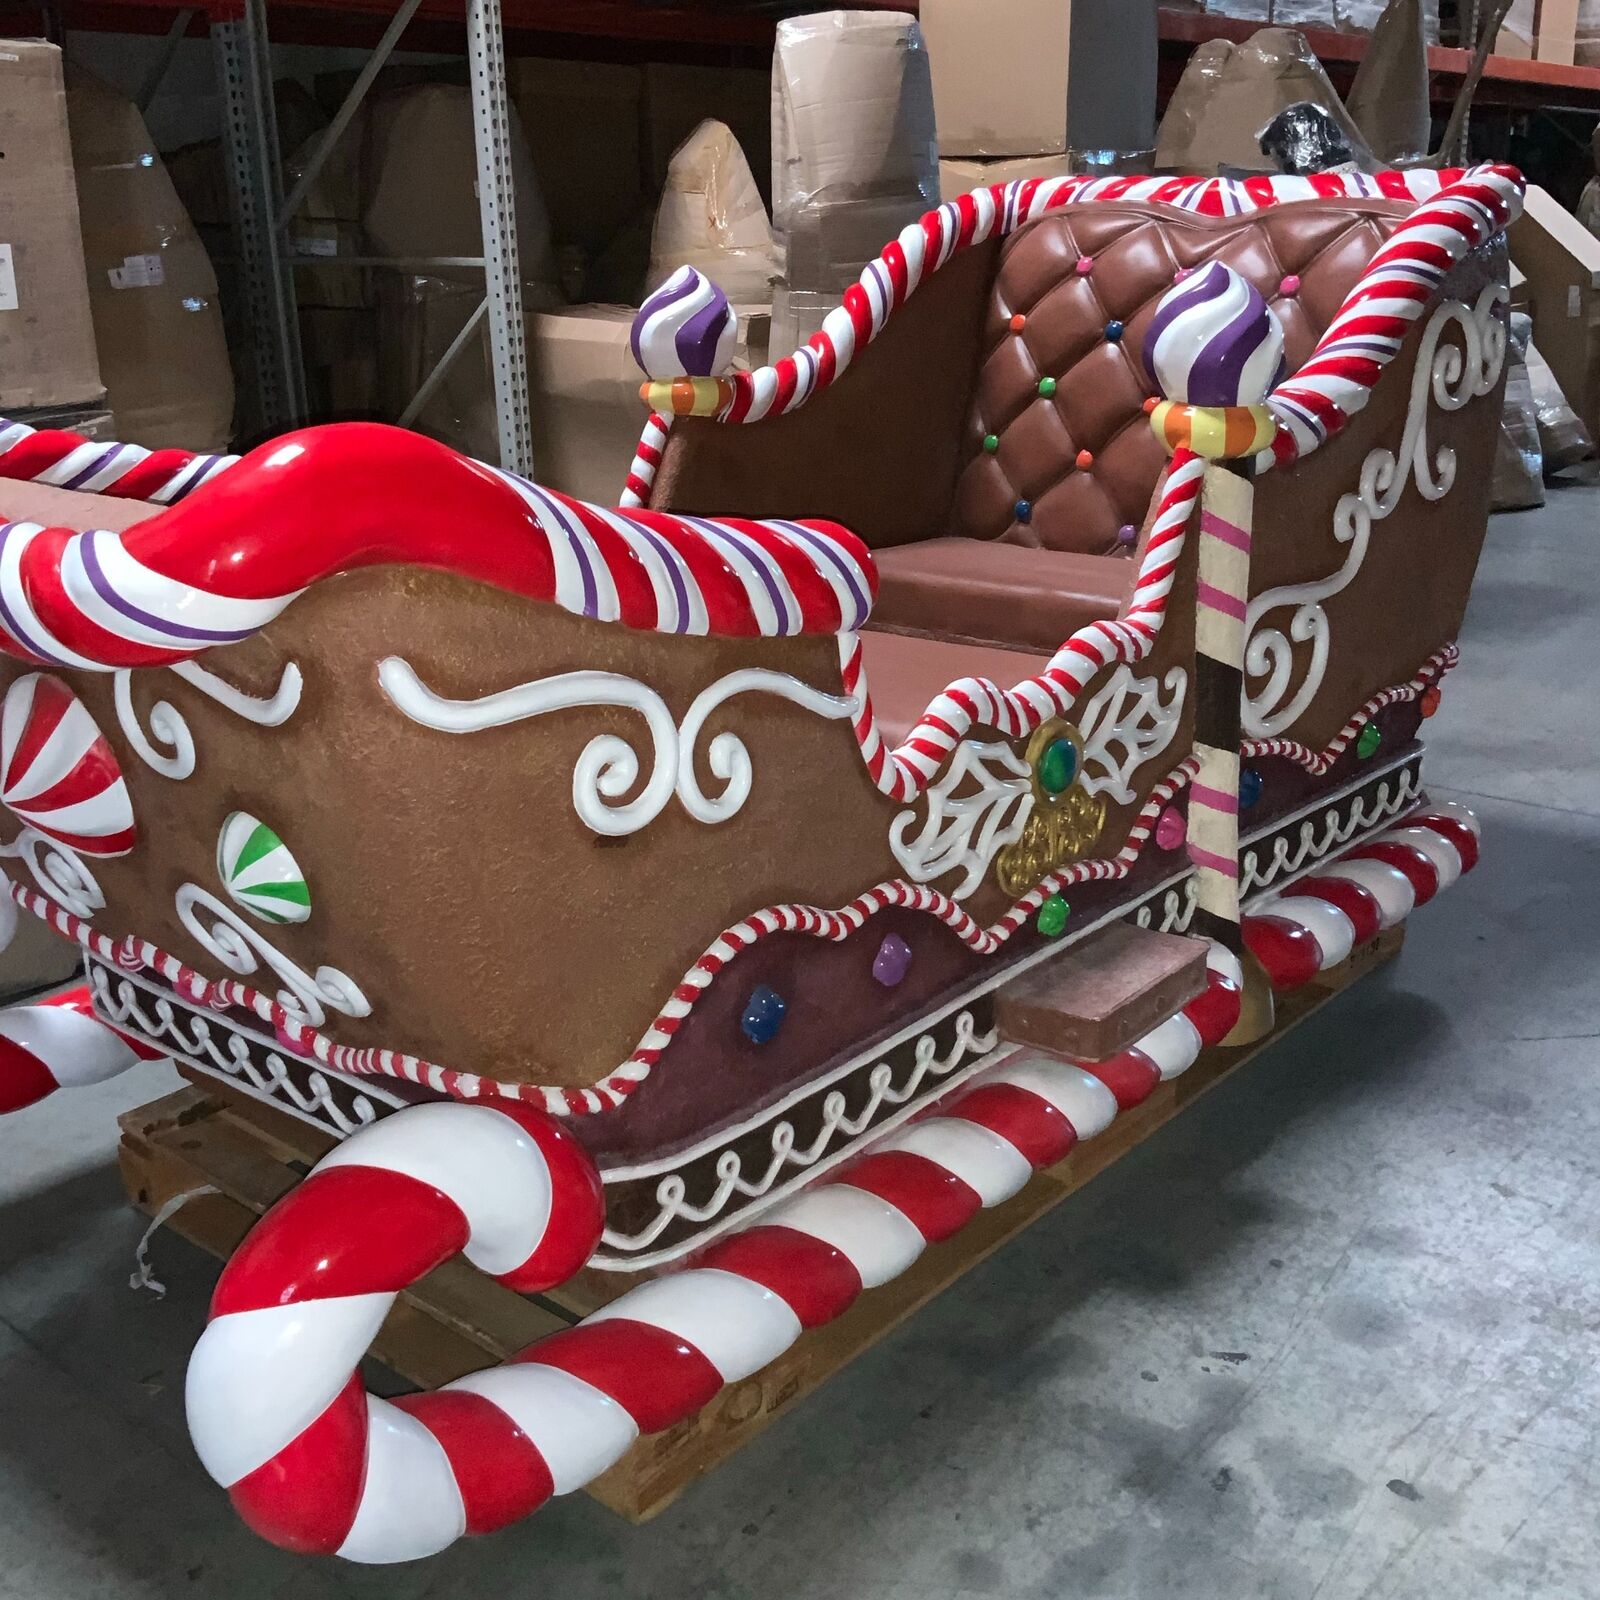 Gingerbread Sleigh Christmas Over Sized Resin Statue 2 Seater Photo Op Prop